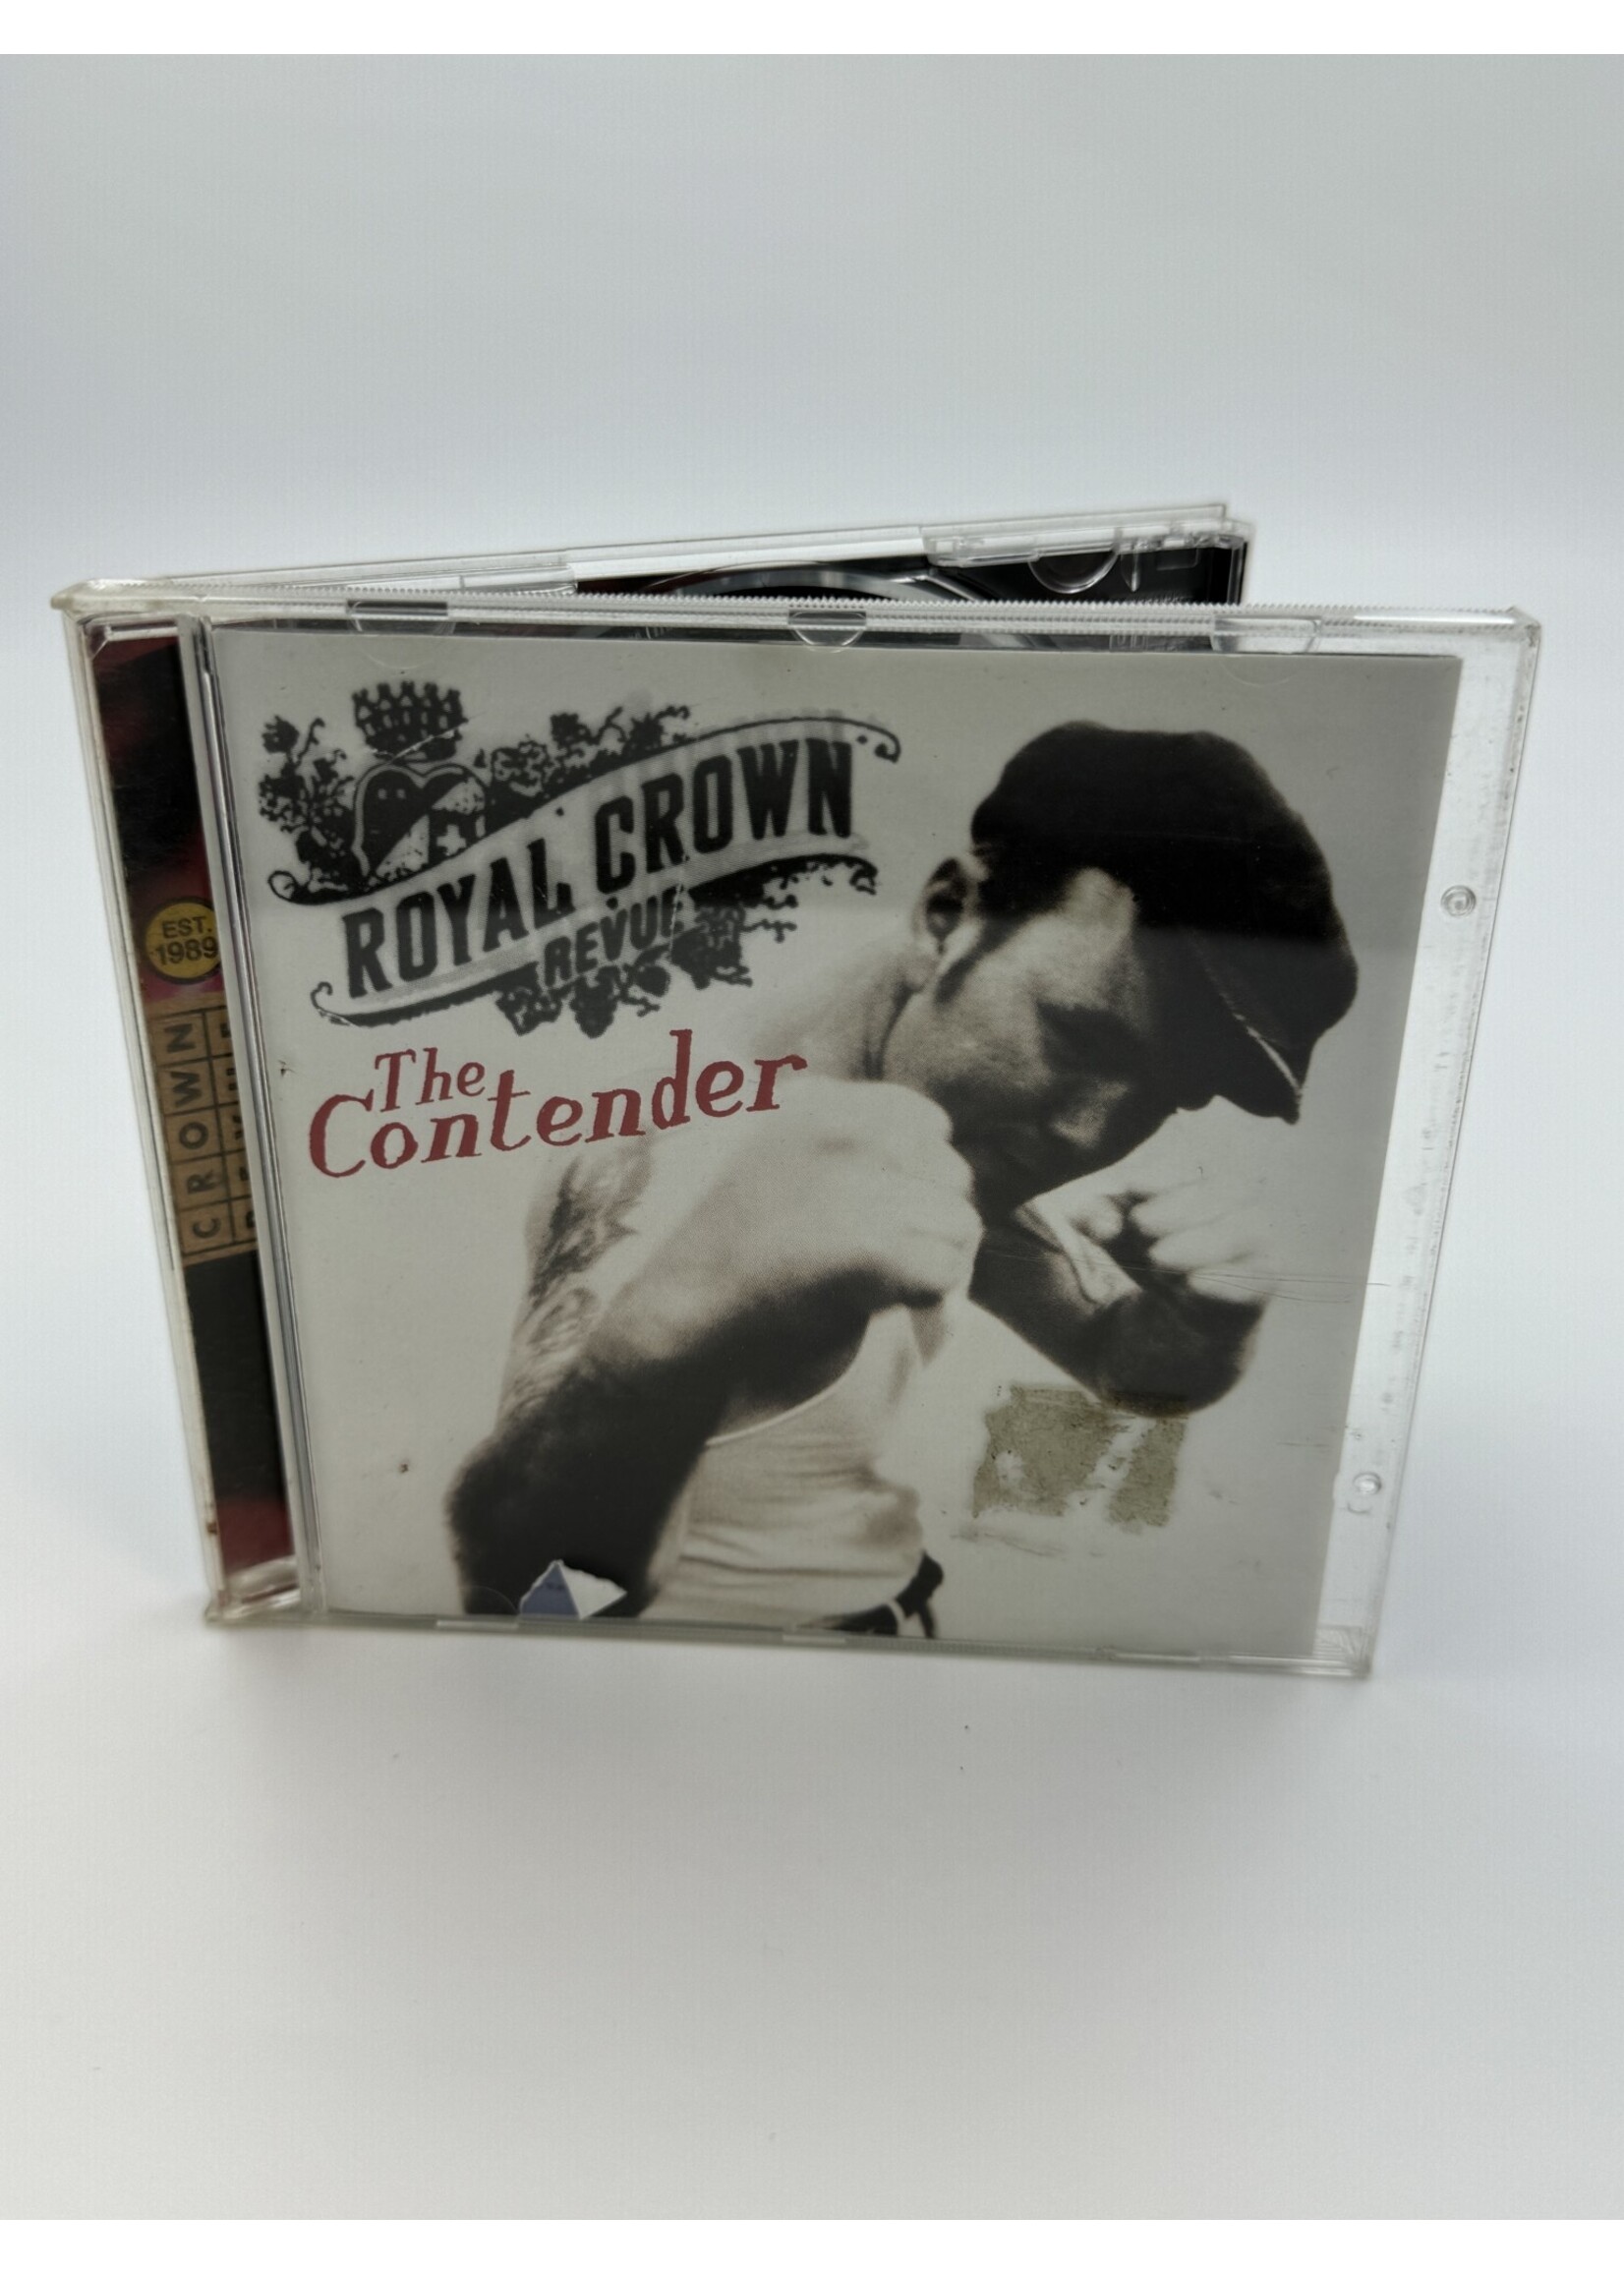 CD Royal Crown Review The Contender CD